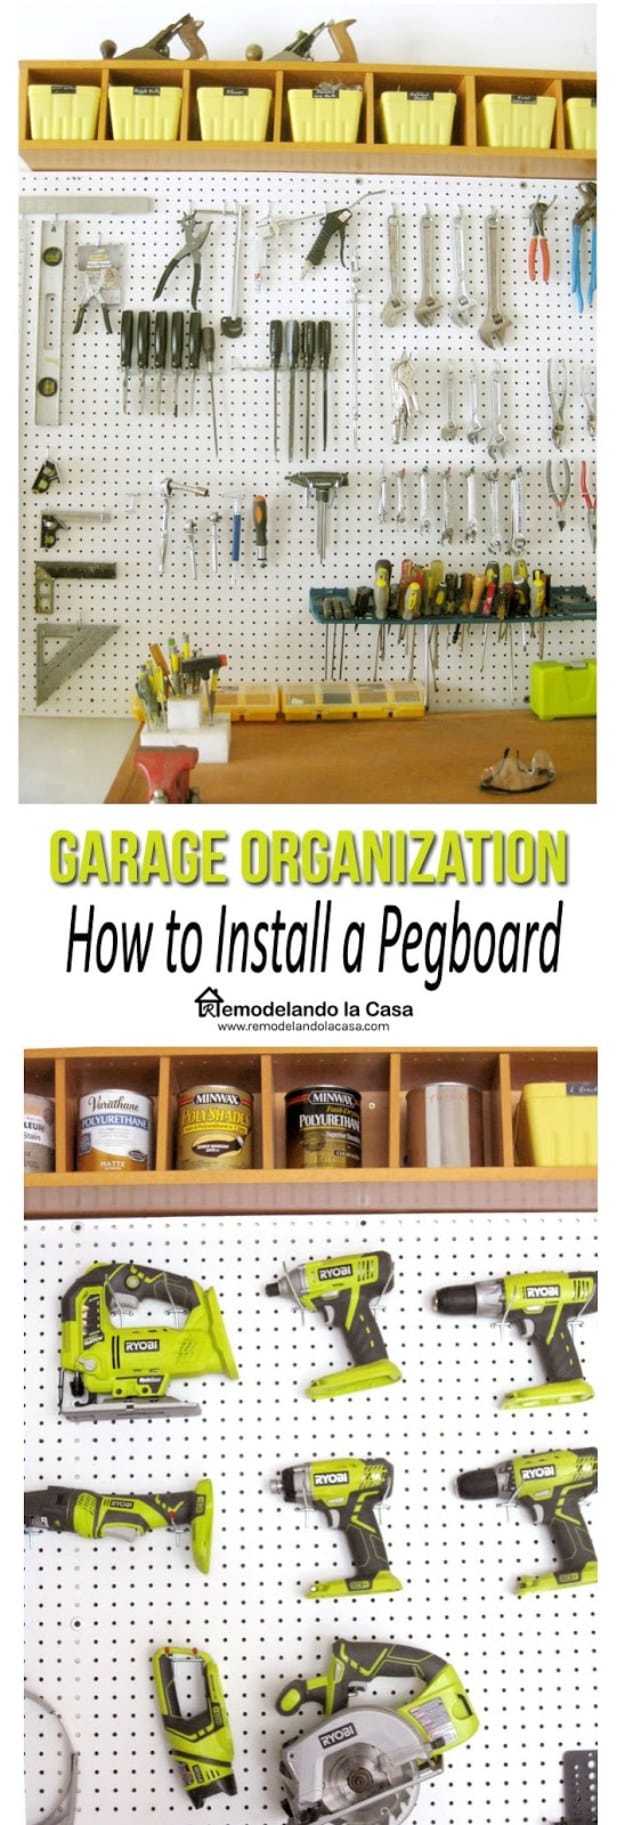 DIY Projects Your Garage Needs -Garage Pegboard Tutorial - Do It Yourself Garage Makeover Ideas Include Storage, Organization, Shelves, and Project Plans for Cool New Garage Decor http://diyjoy.com/diy-projects-garage